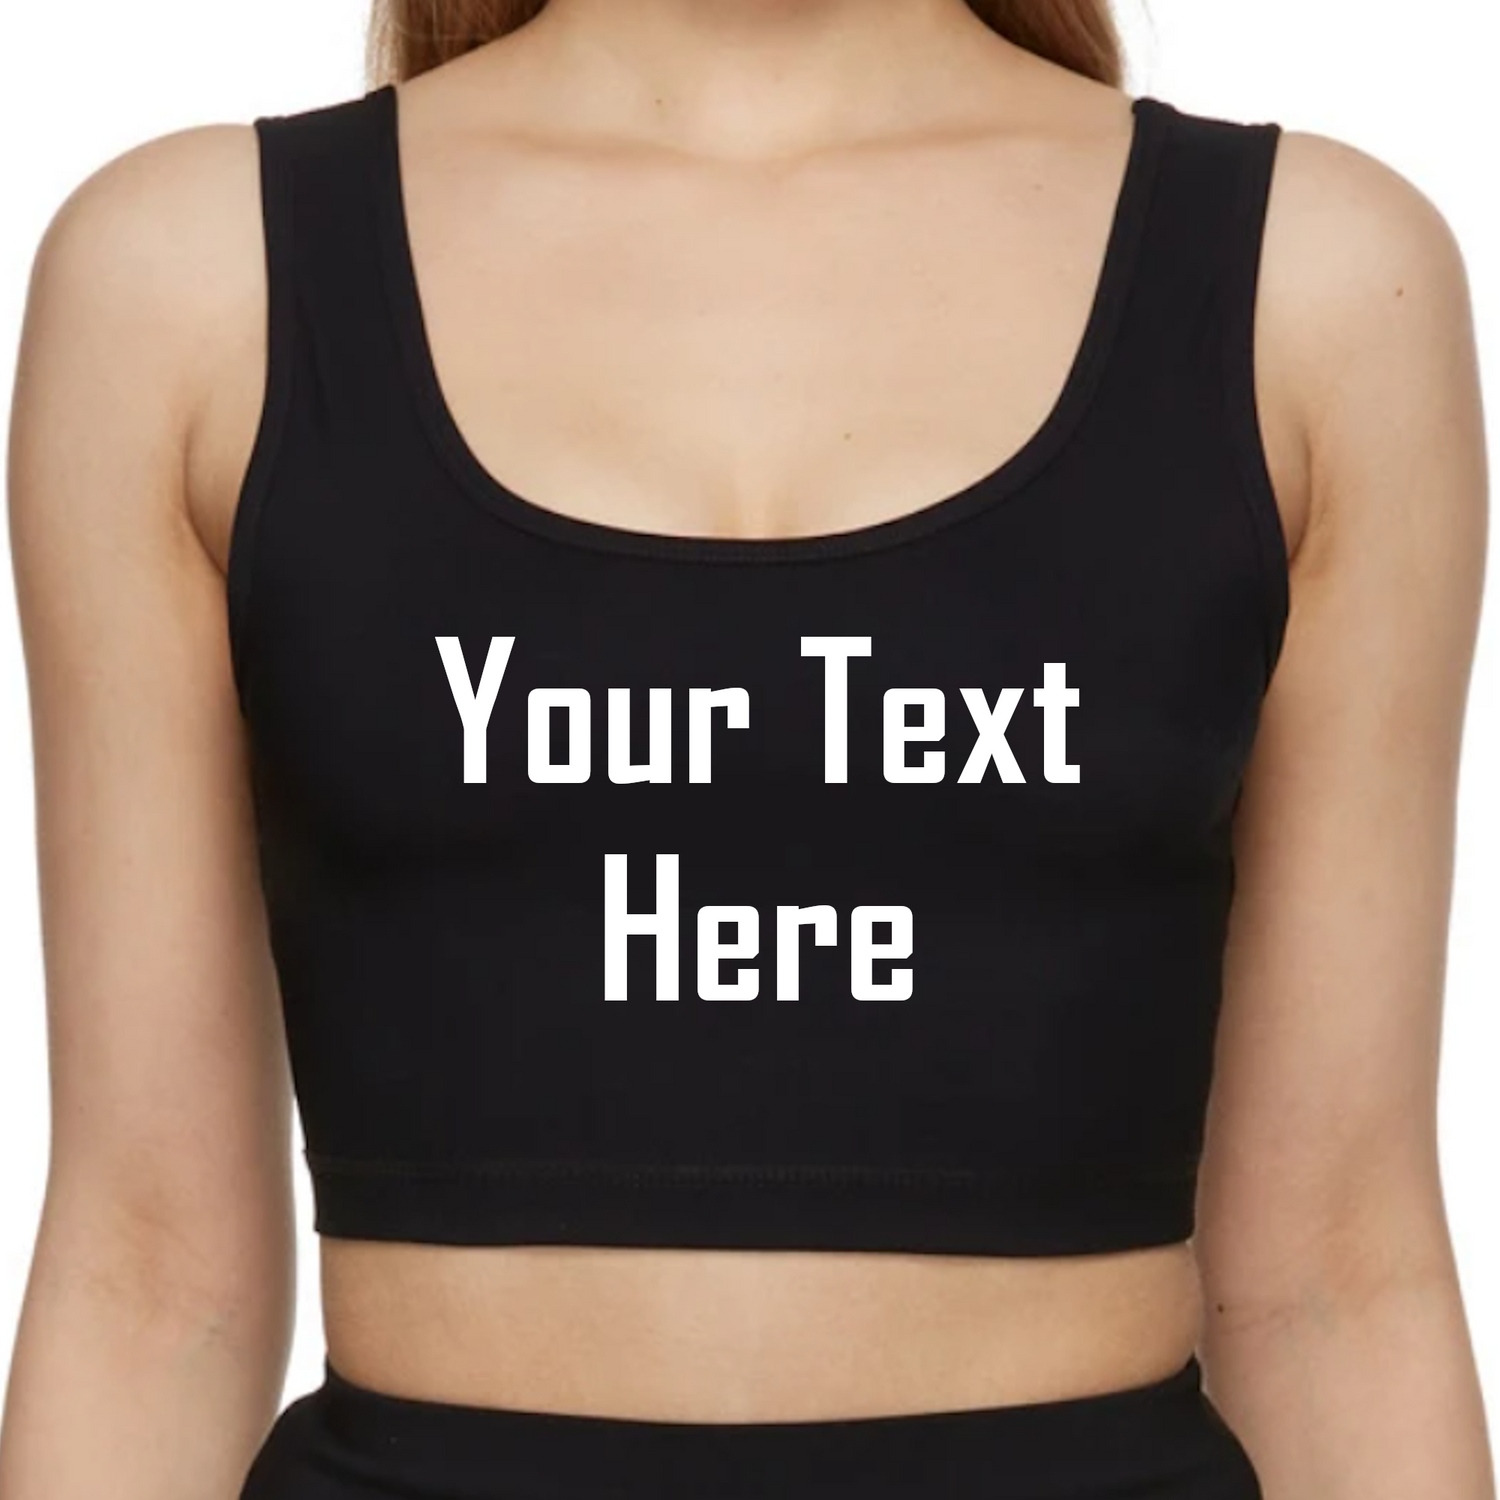 Personalized Crop Tops